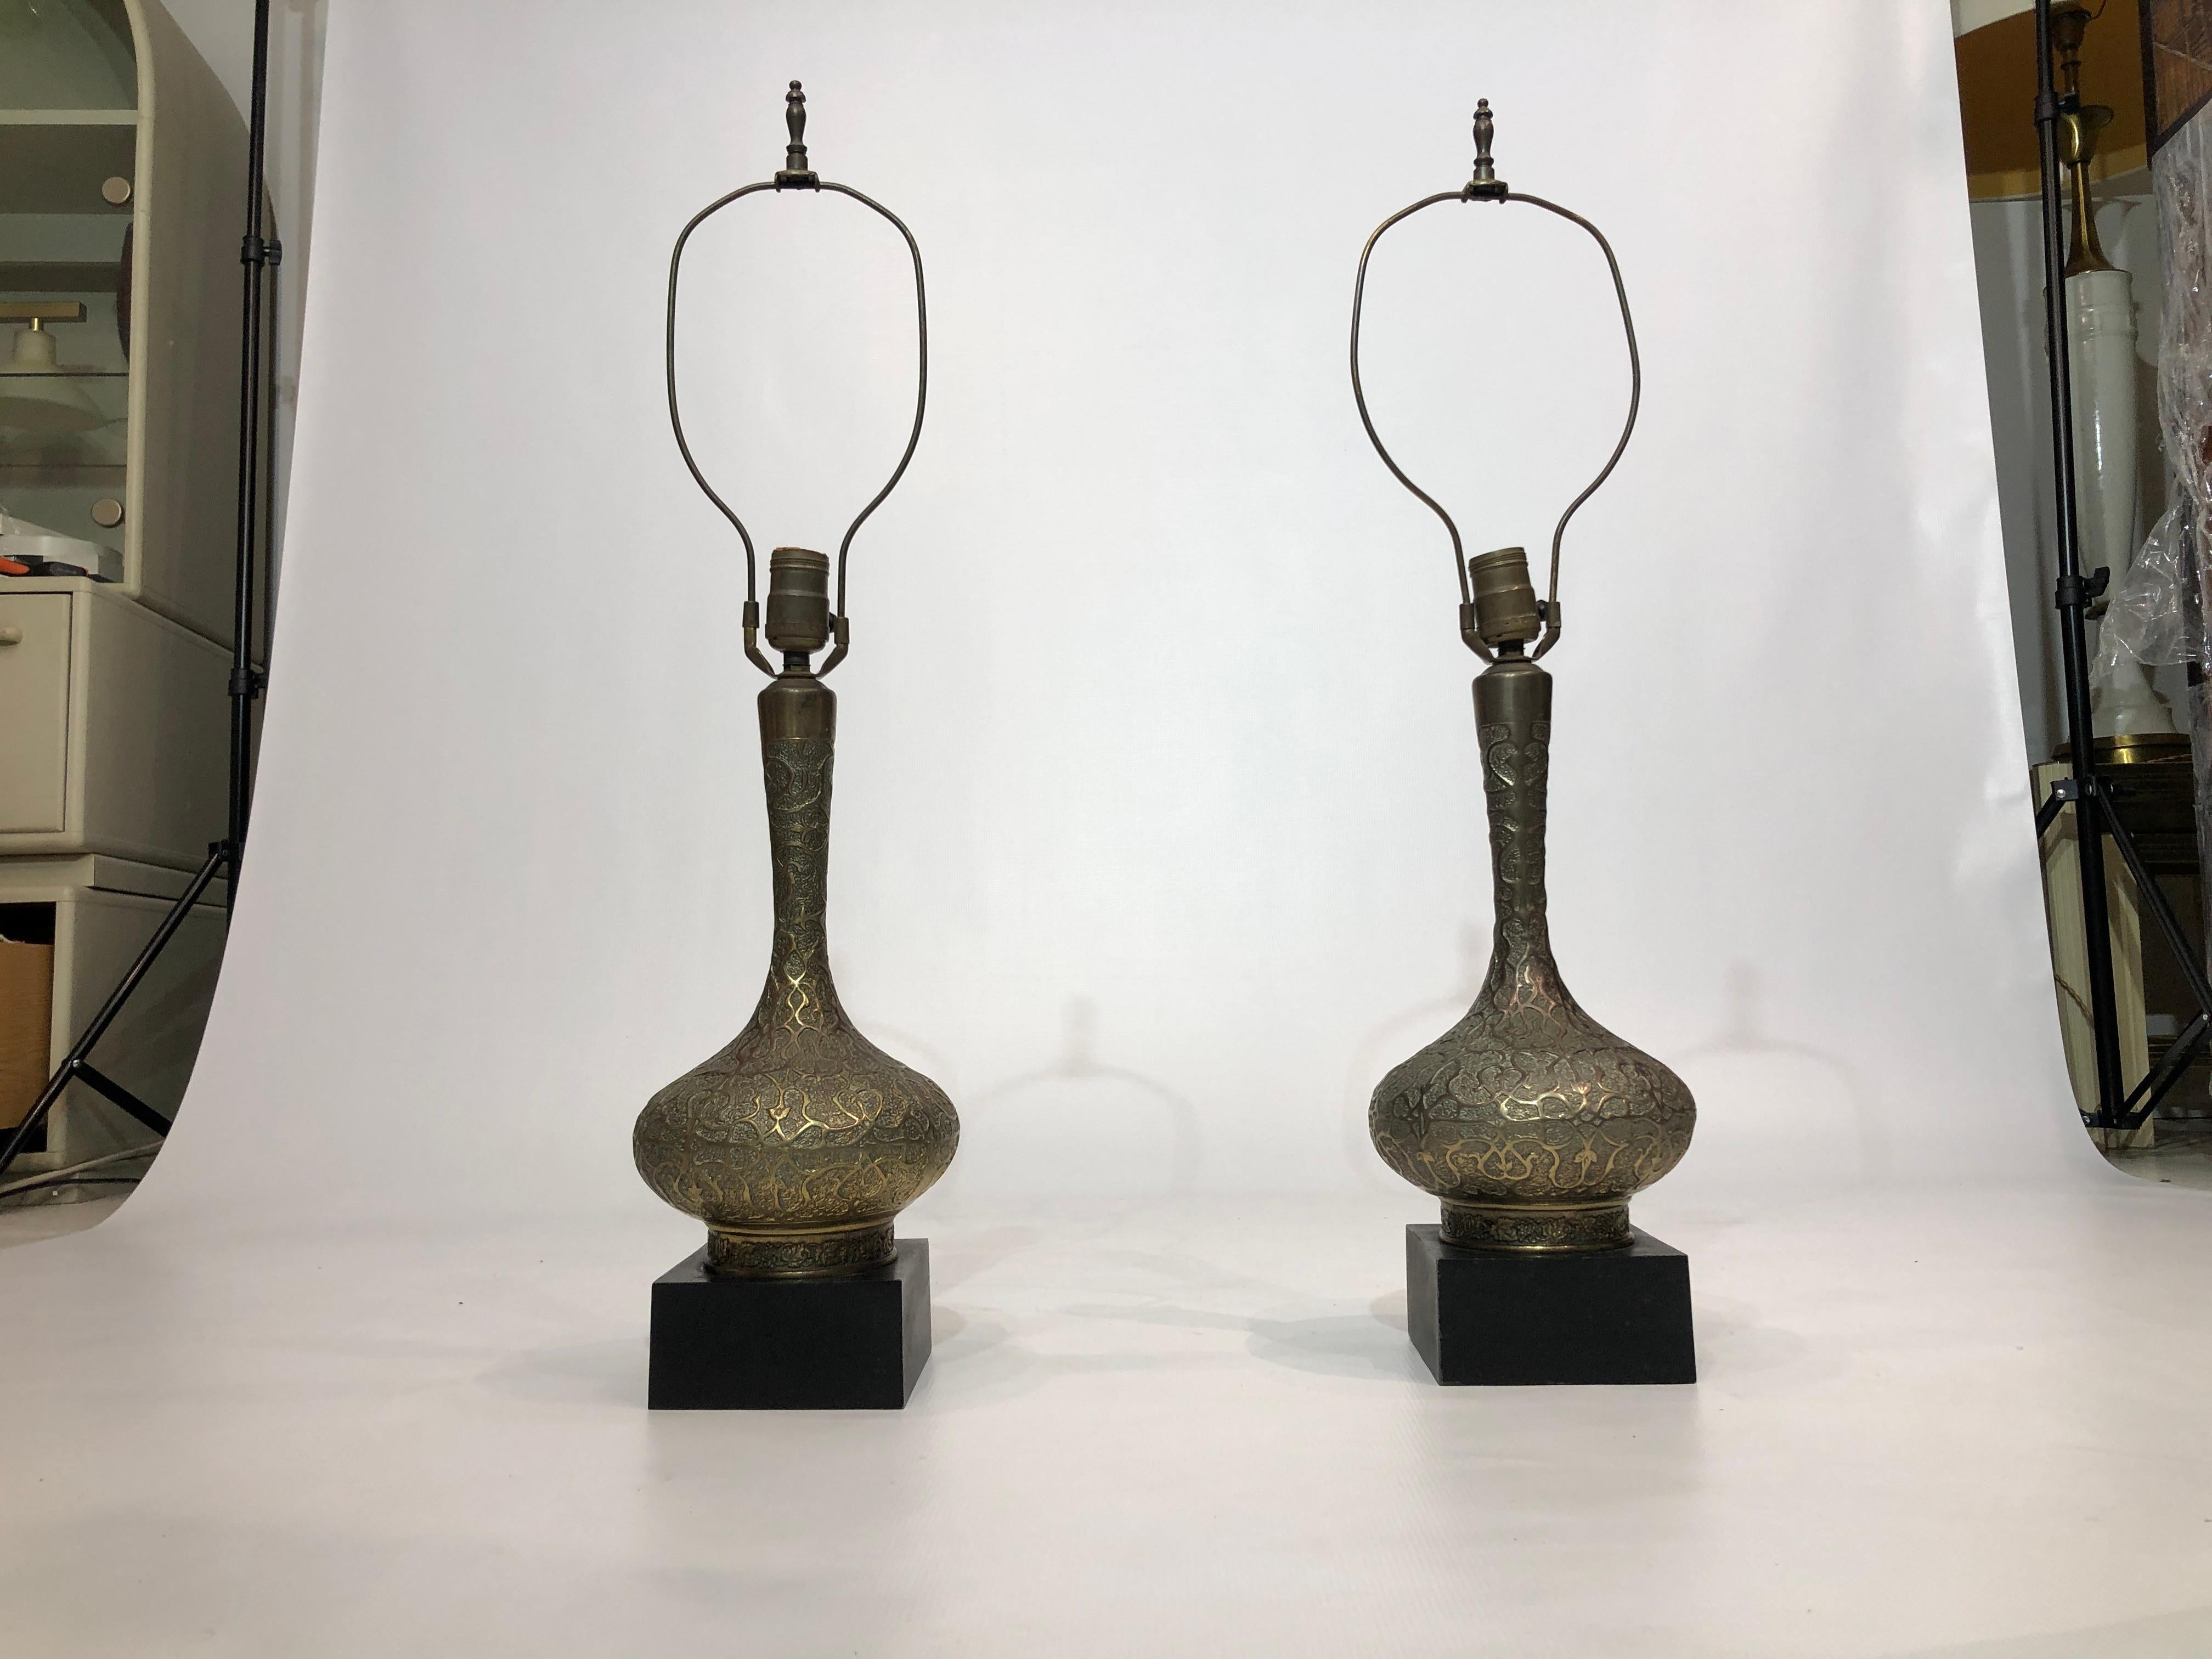 Pair of oriental style table lamps in bass embossed and patinated body and black metal base. The brass body has a beautiful orientalist revival design yet discrete, they would look amazing with the right shades and in a modern or vintage interior,